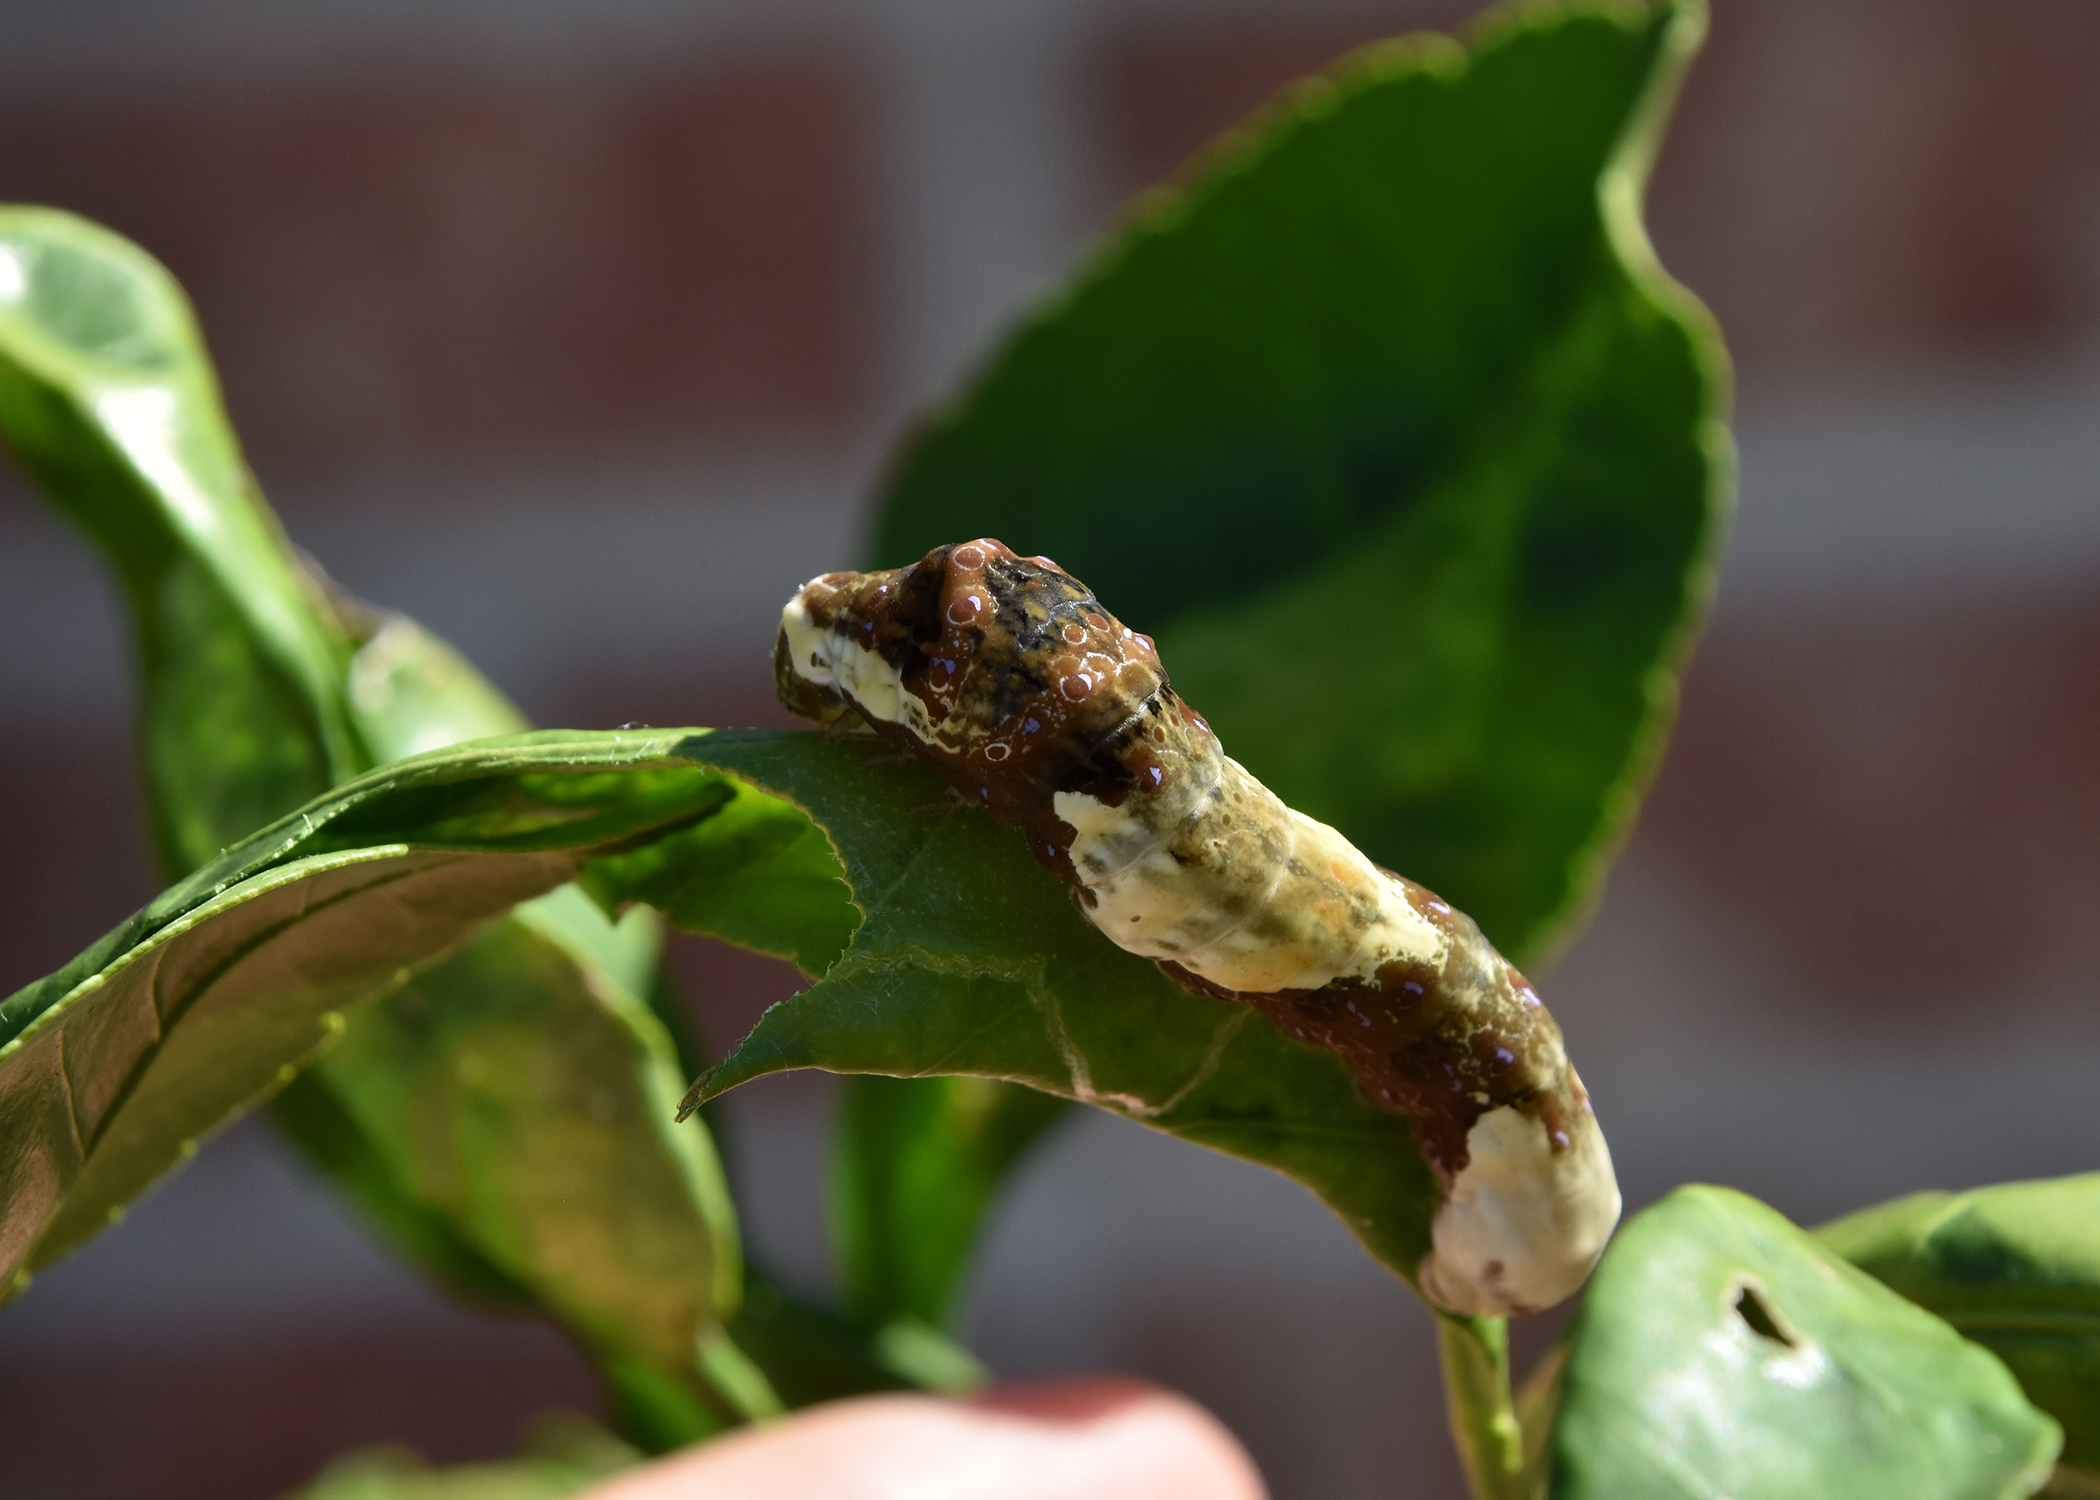 This caterpillar of the Giant Swallowtail butterfly is known as the bird-dropping caterpillar because of its appearance, which is a defense against predators. Citrus is one of its preferred host plants. (Photo by MSU Extension/Gary Bachman)